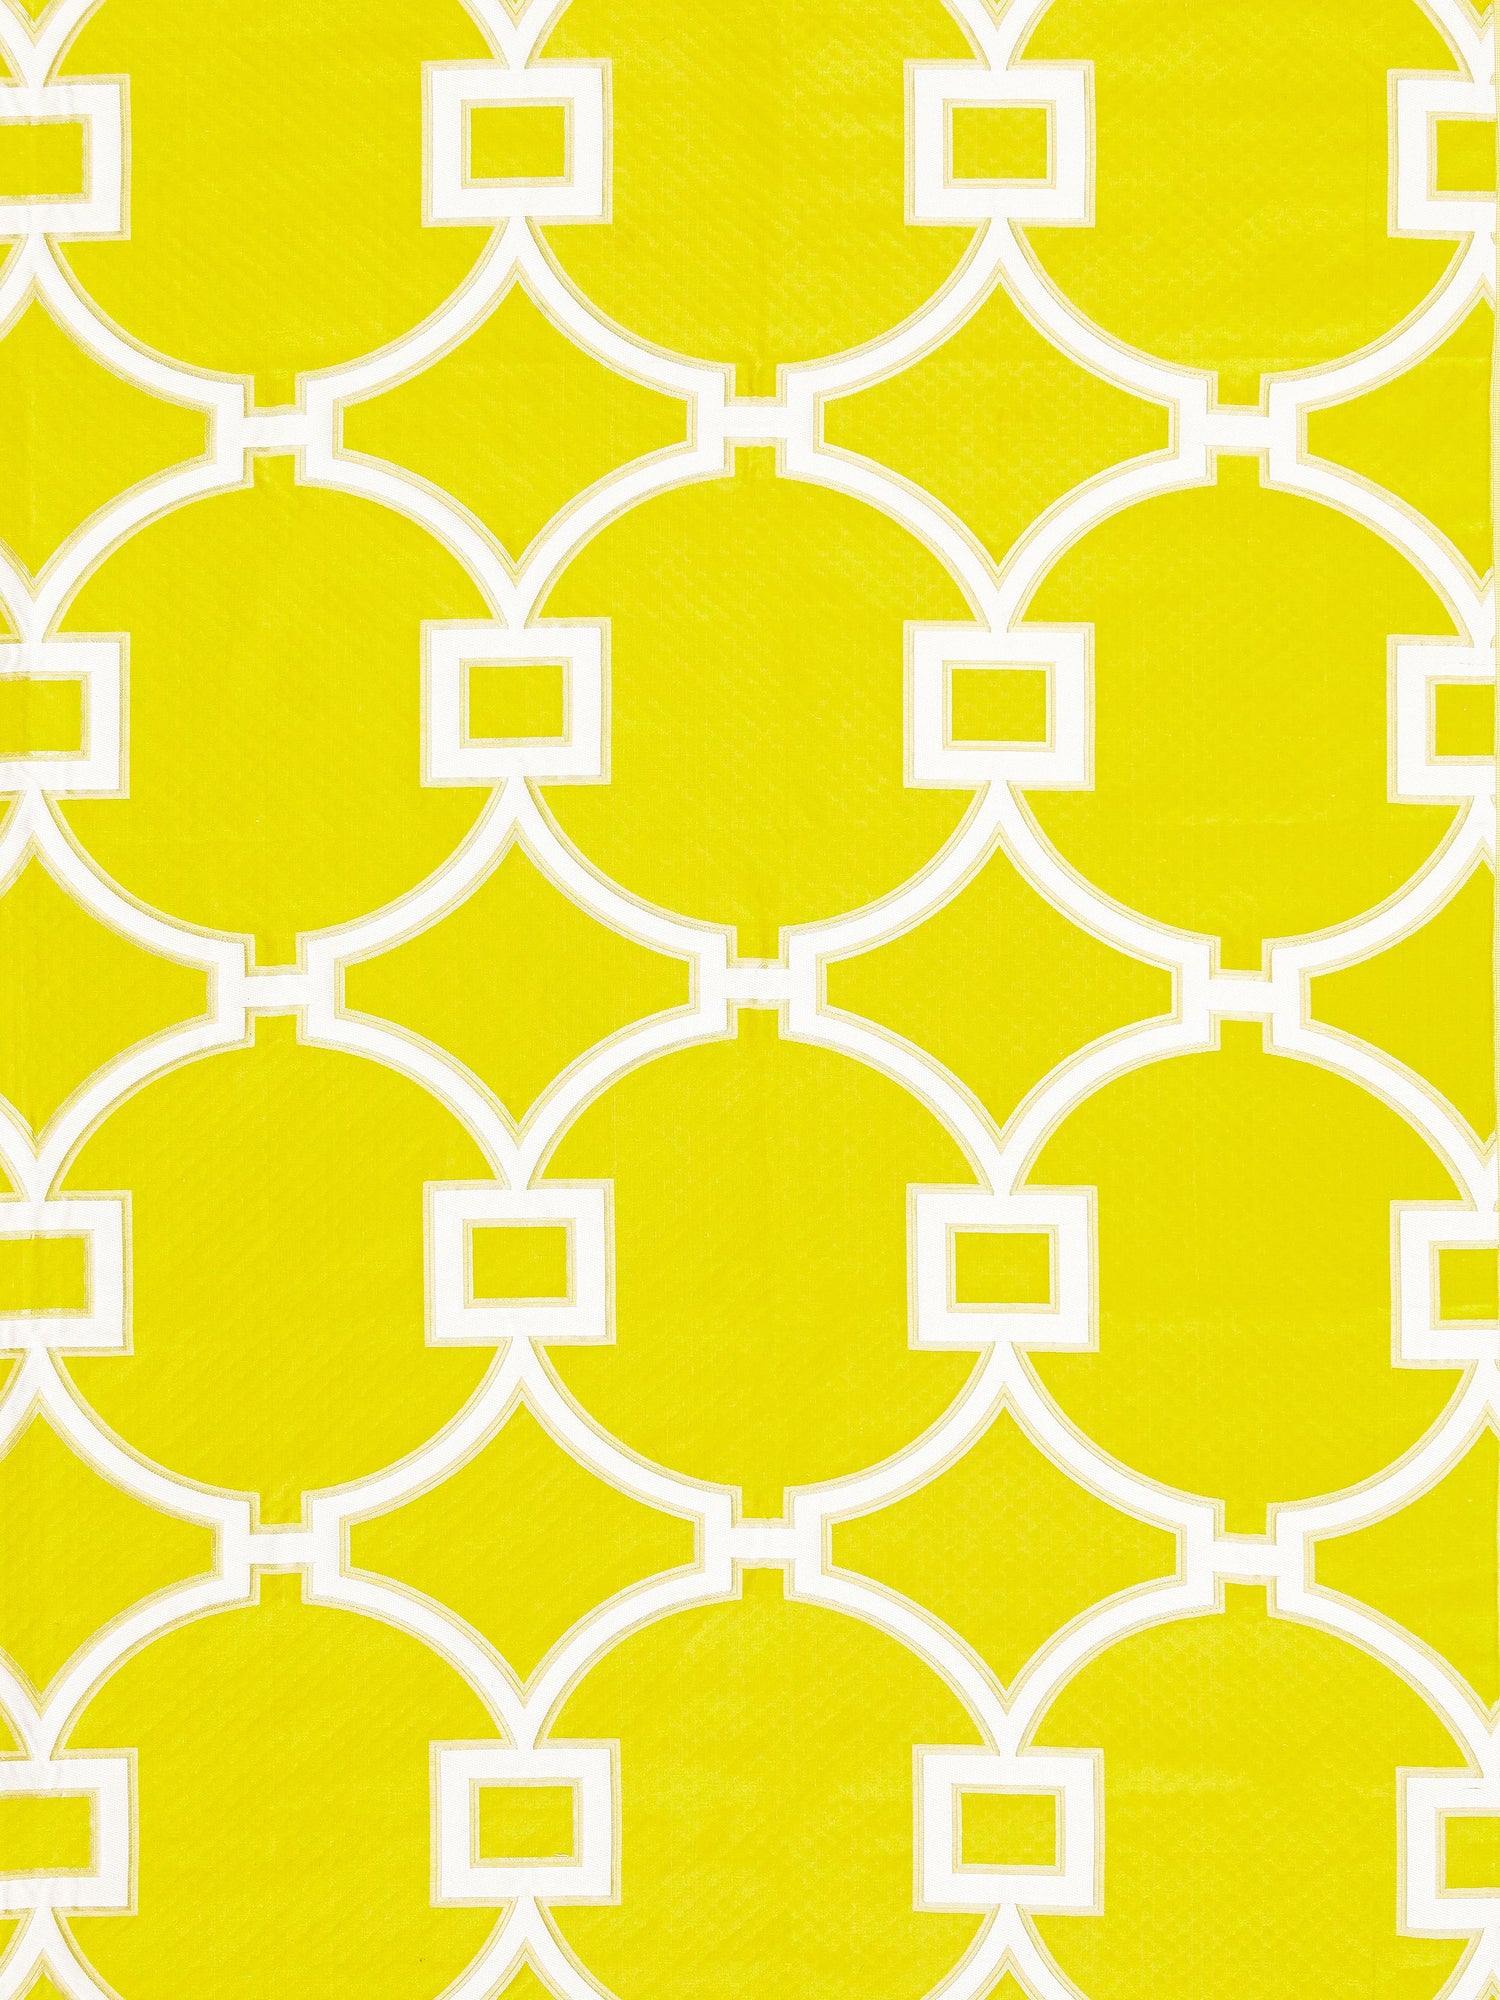 Circle Fret fabric in forsythia color - pattern number SC 000227072 - by Scalamandre in the Scalamandre Fabrics Book 1 collection